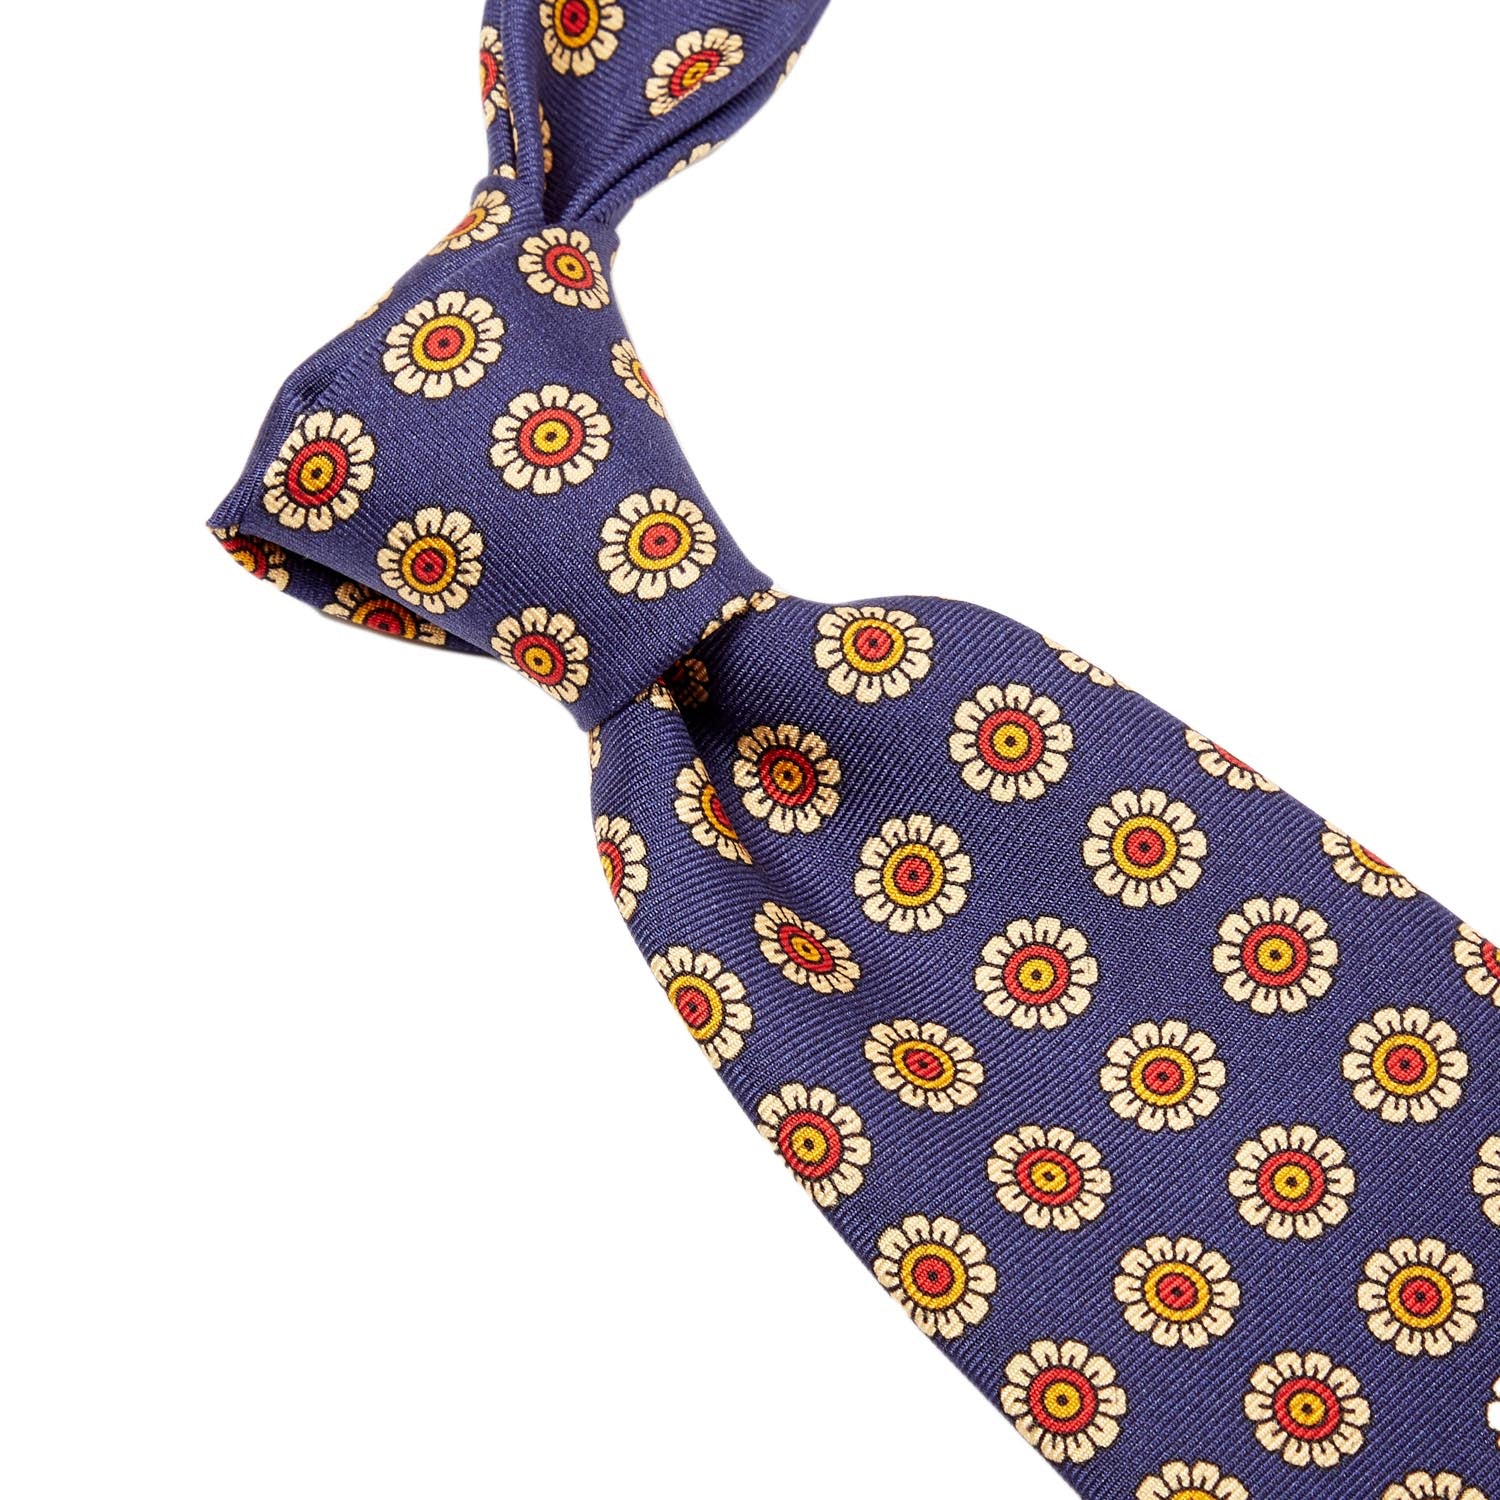 A Sovereign Grade Navy Daisy Spring Madder Buff Tie (150x8.5 cm) made from 100% English silk, available at KirbyAllison.com.